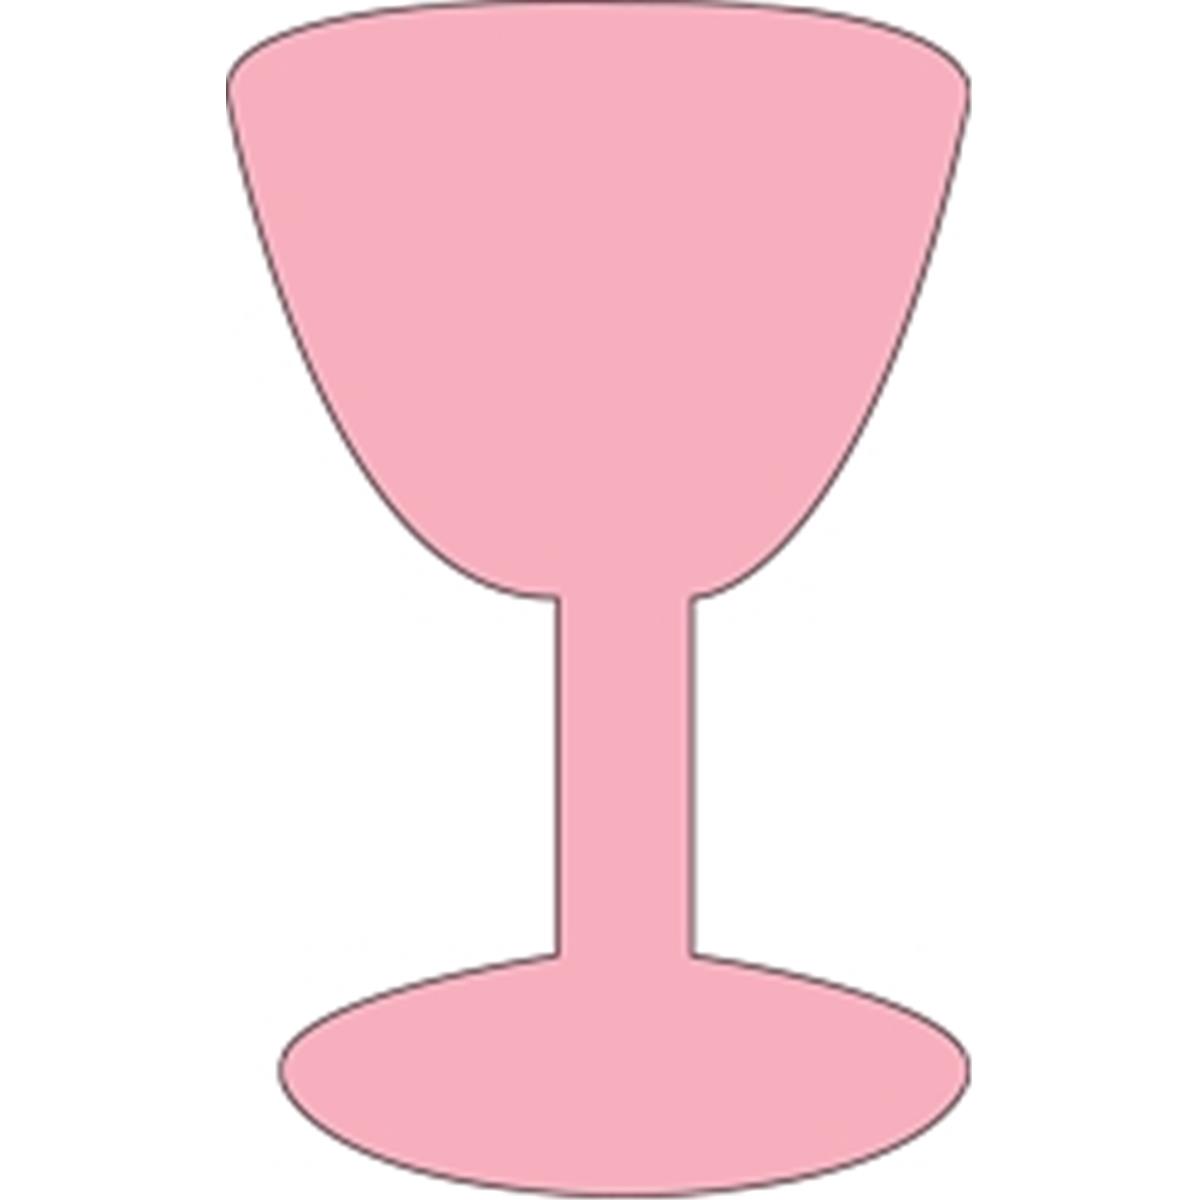 Se-0993 4.5 X 4 In. Small Single Color Sticky Shape Notepad, Wine Glass-pink - 50 Sheets Per Pack